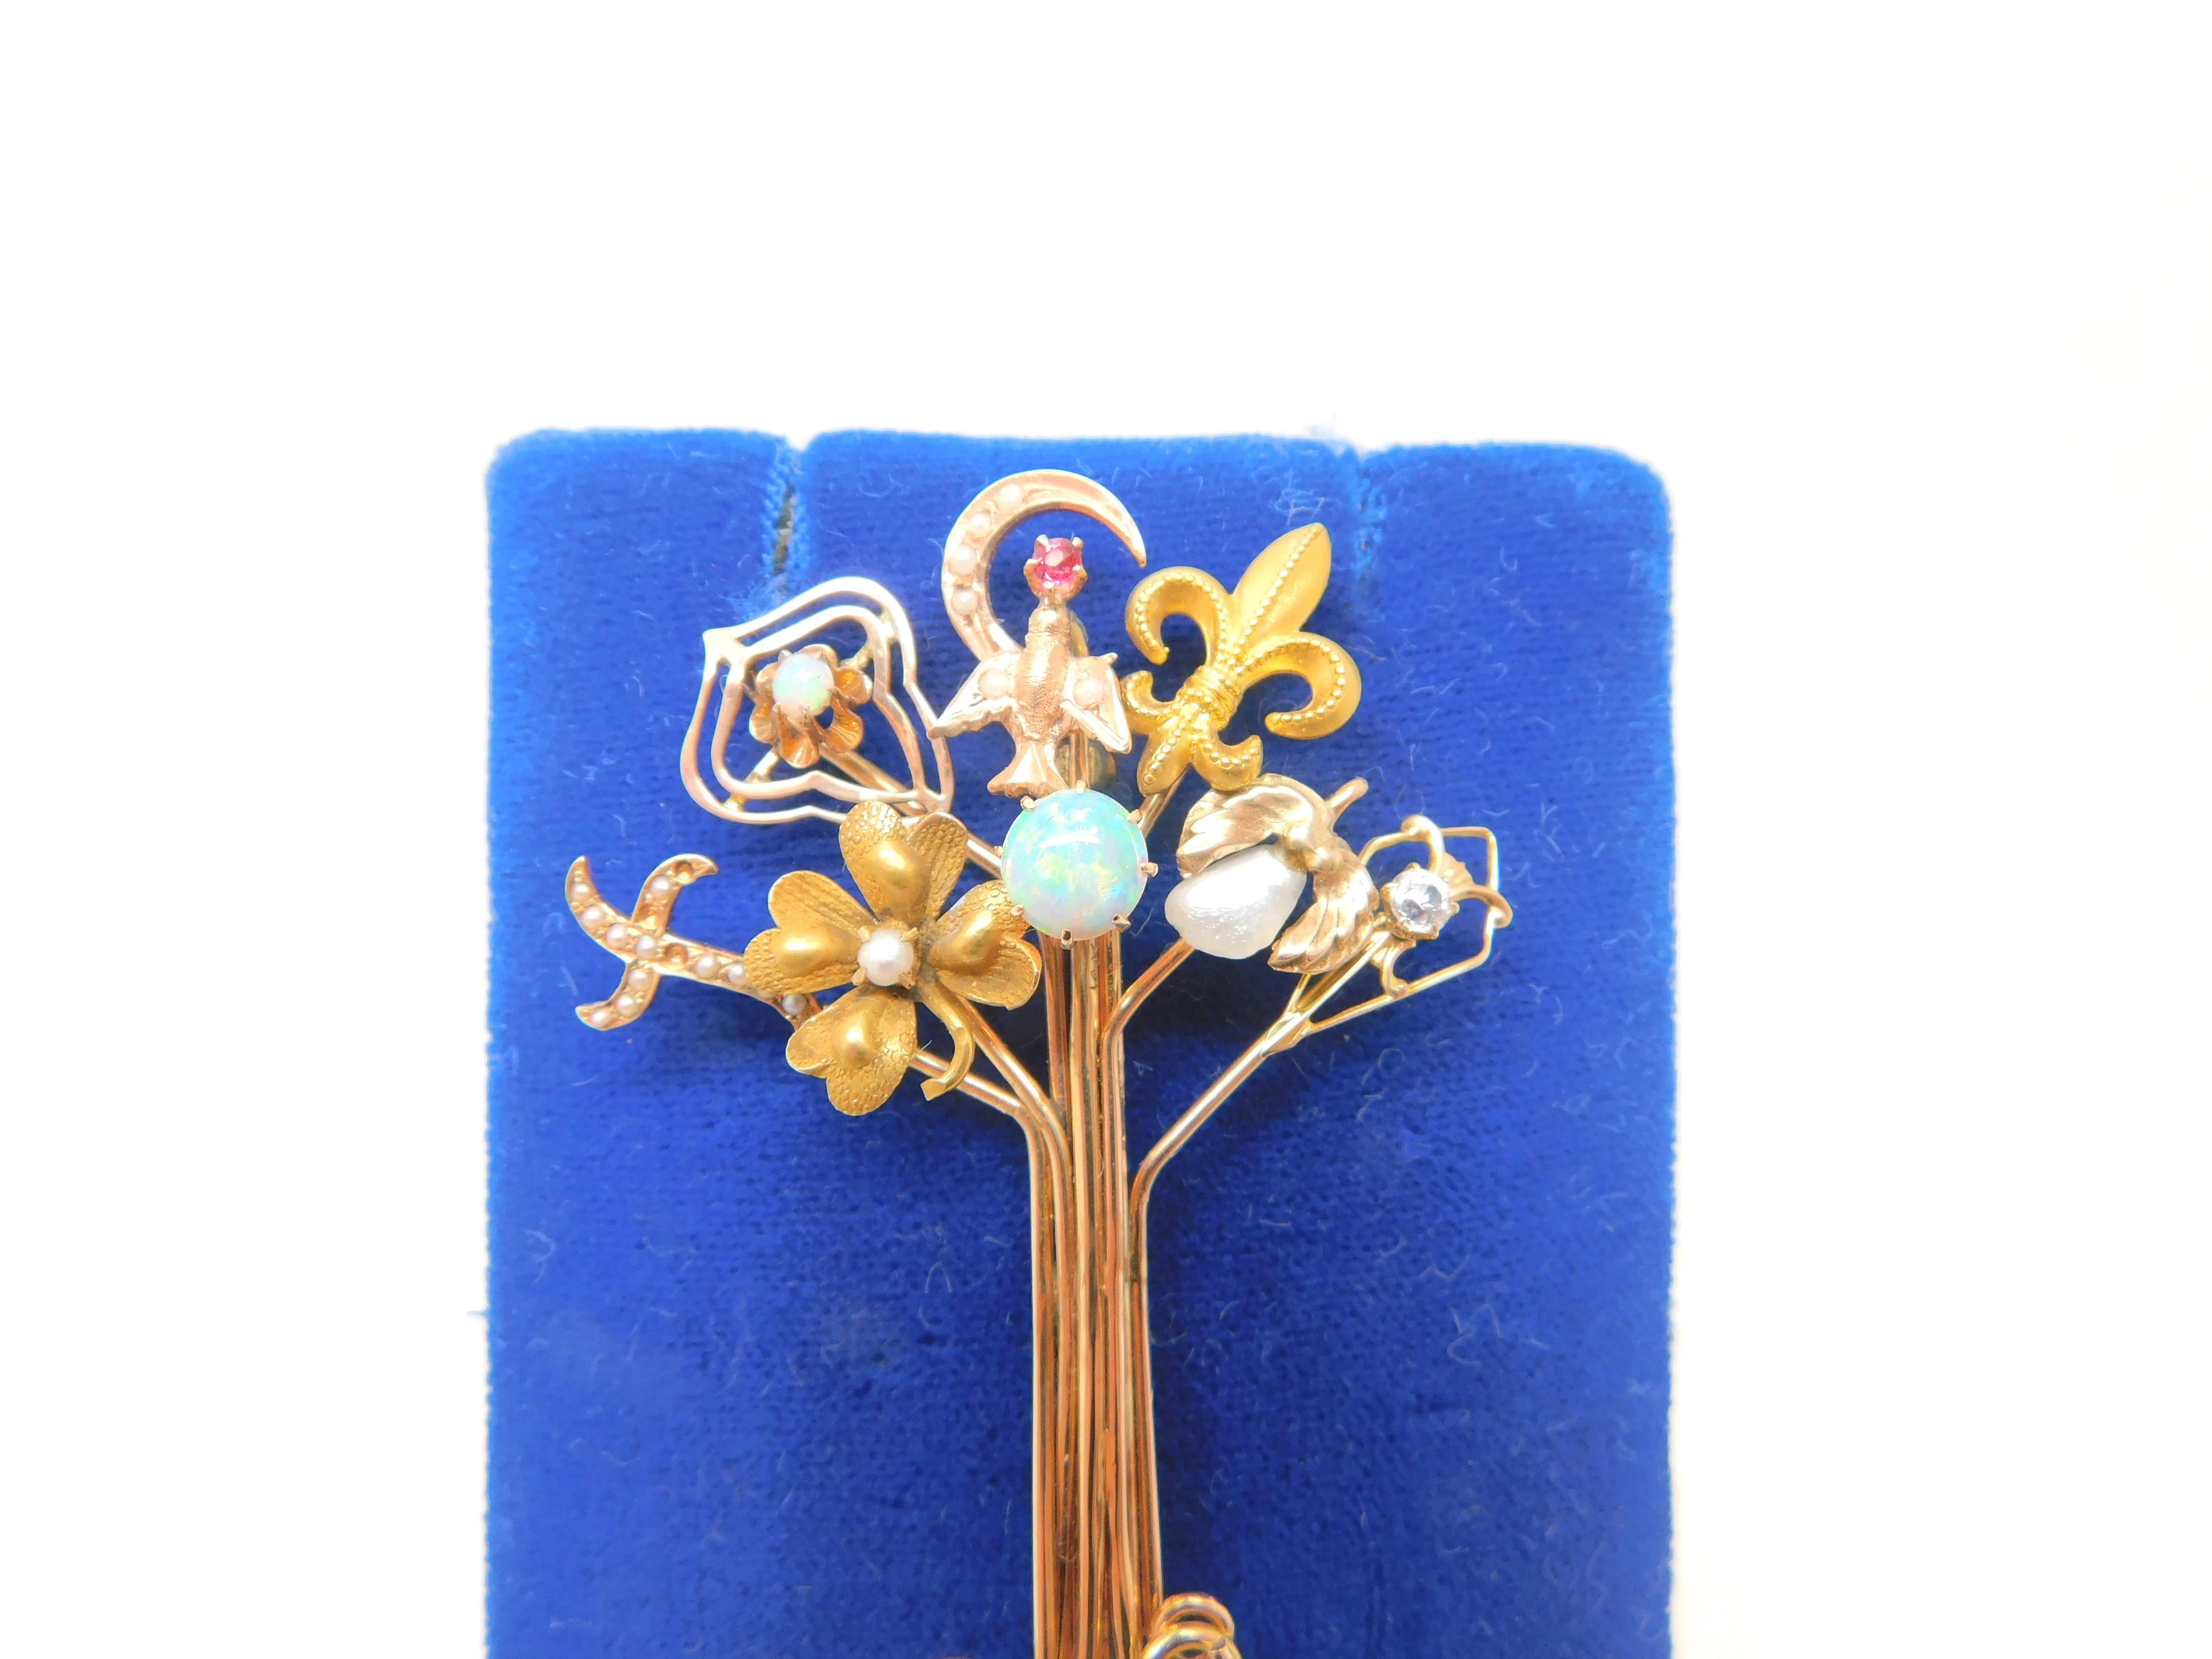 Victorian rose gold stick pin collection pin in the form of a tree.  The pin is made from 8 stick pins that are 10K and 14K.  The pins including: an opal, fleur de lis, freshwater pearl, a dove with a ruby, a cross with seed pearls, a 4 leaf clover